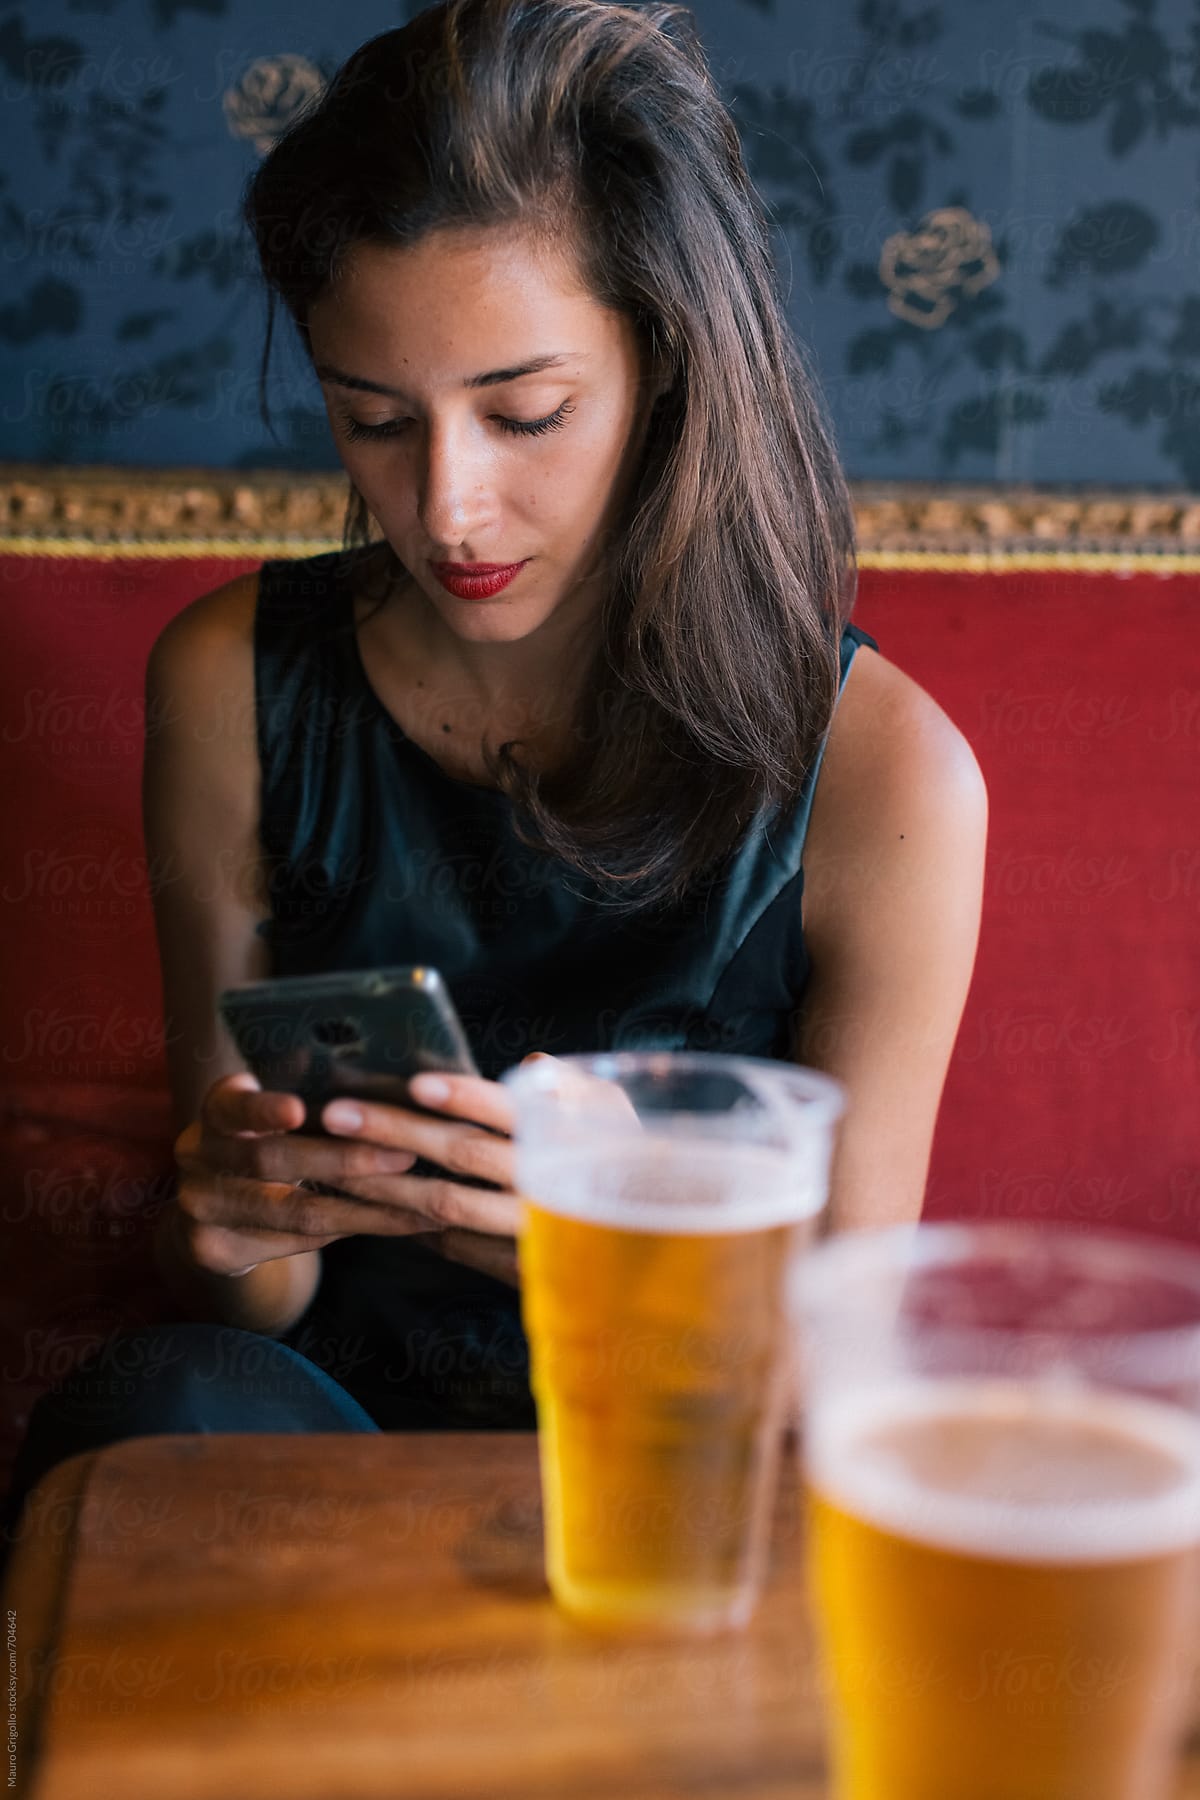 Woman uses social media while drinks a beer in a Pub